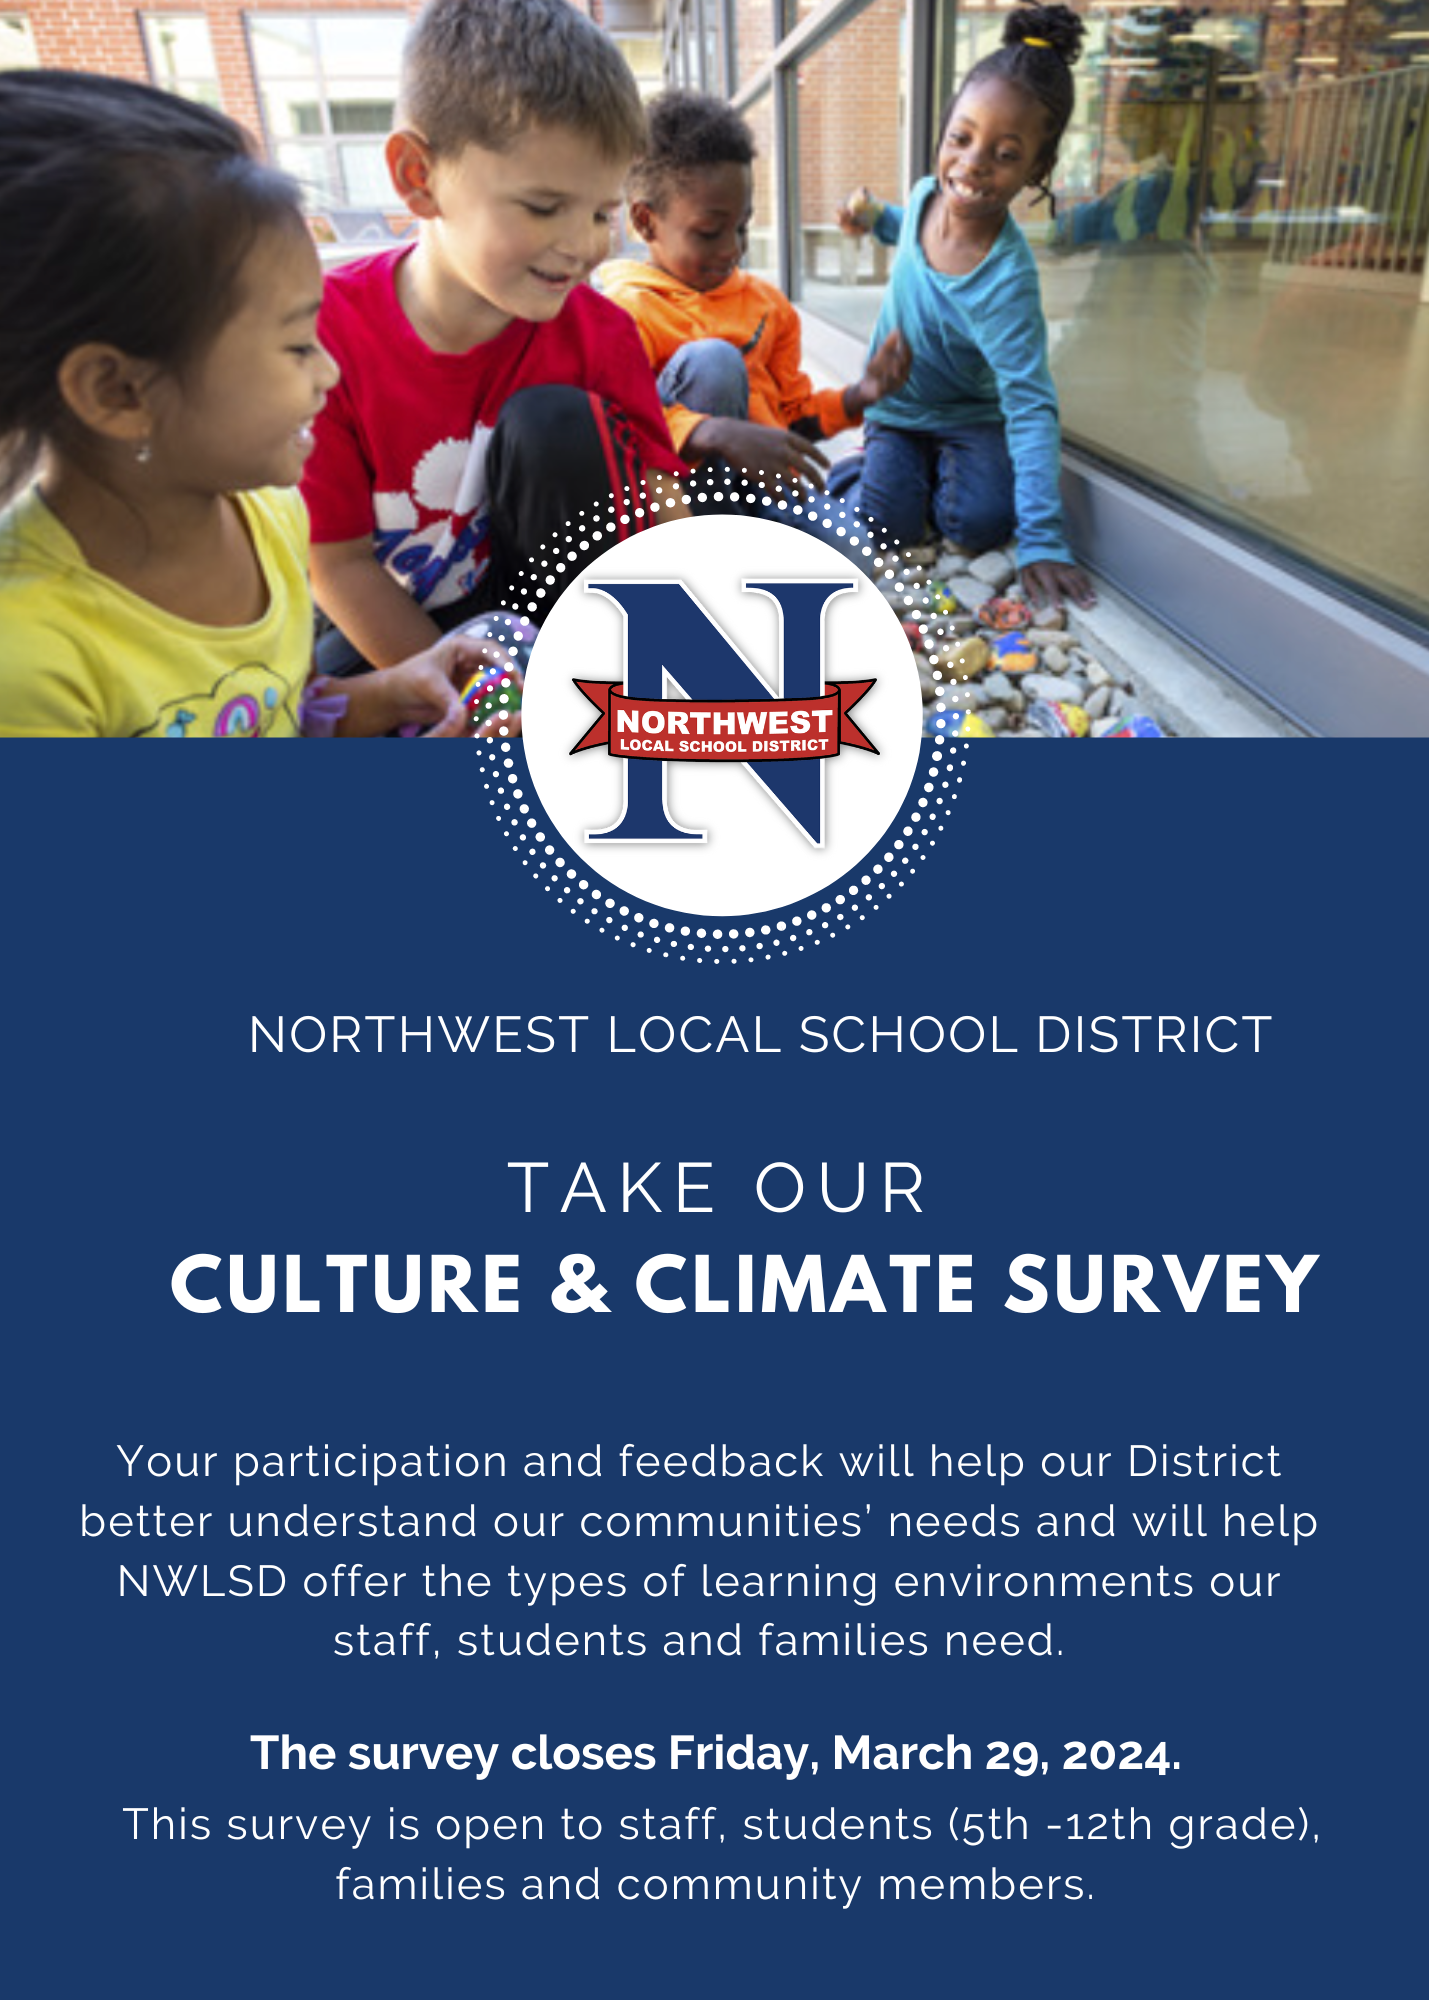 Your participation and feedback will help our District better understand our communities’ needs and will help NWLSD offer the types of learning environments our staff, students and families need. The survey closes Friday, March 29, 2024. This survey is open to staff, students (5th -12th grade), families and community members. 